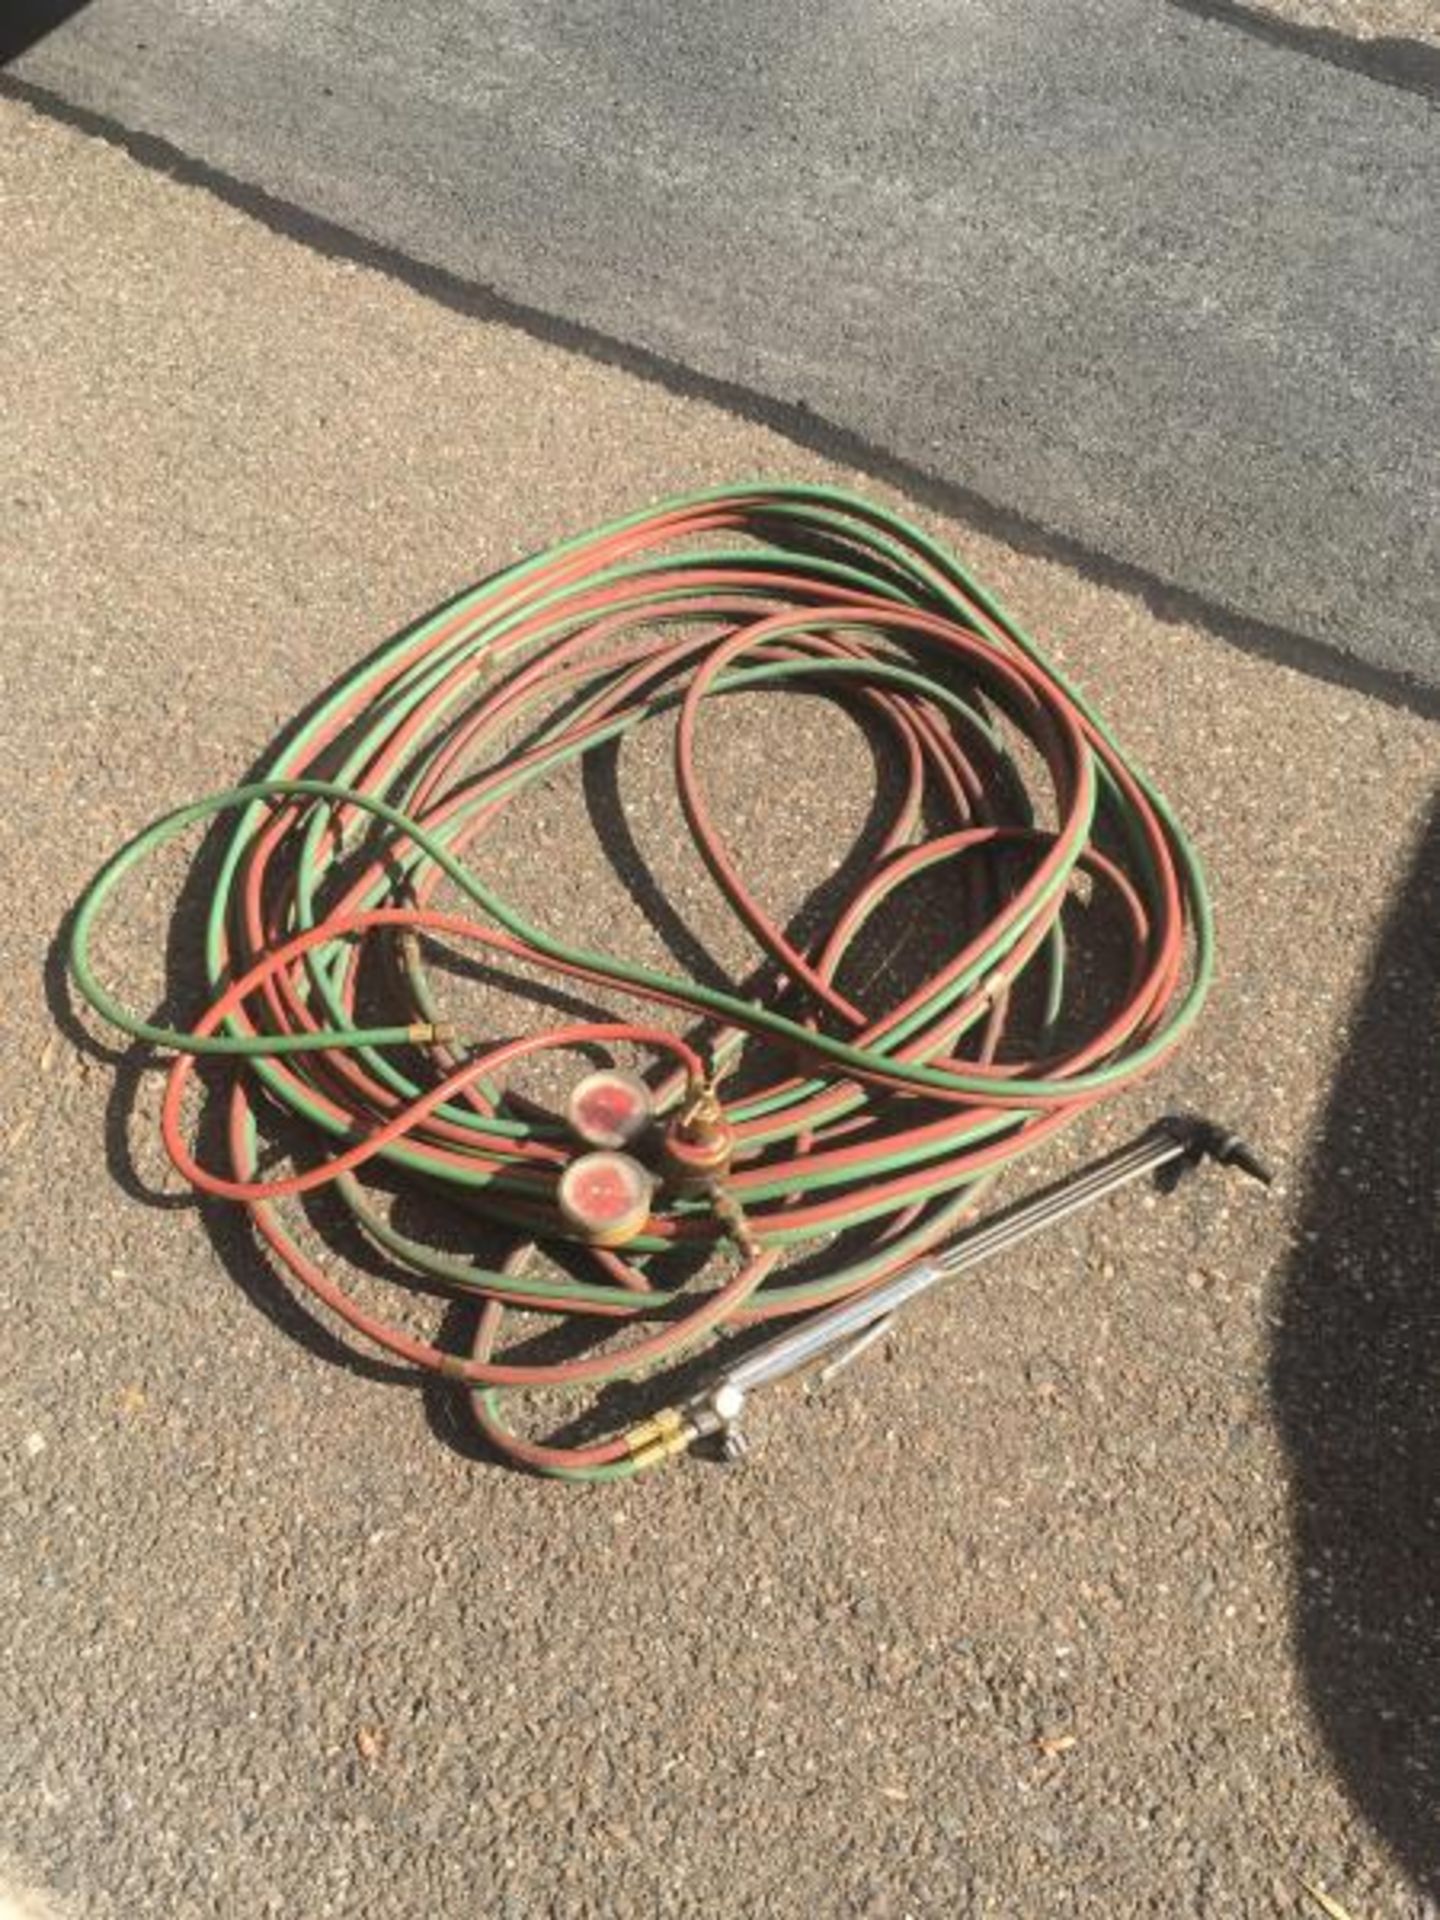 Approx 30Ft of Oxy/Acetylene Hose with Gauge and Torch